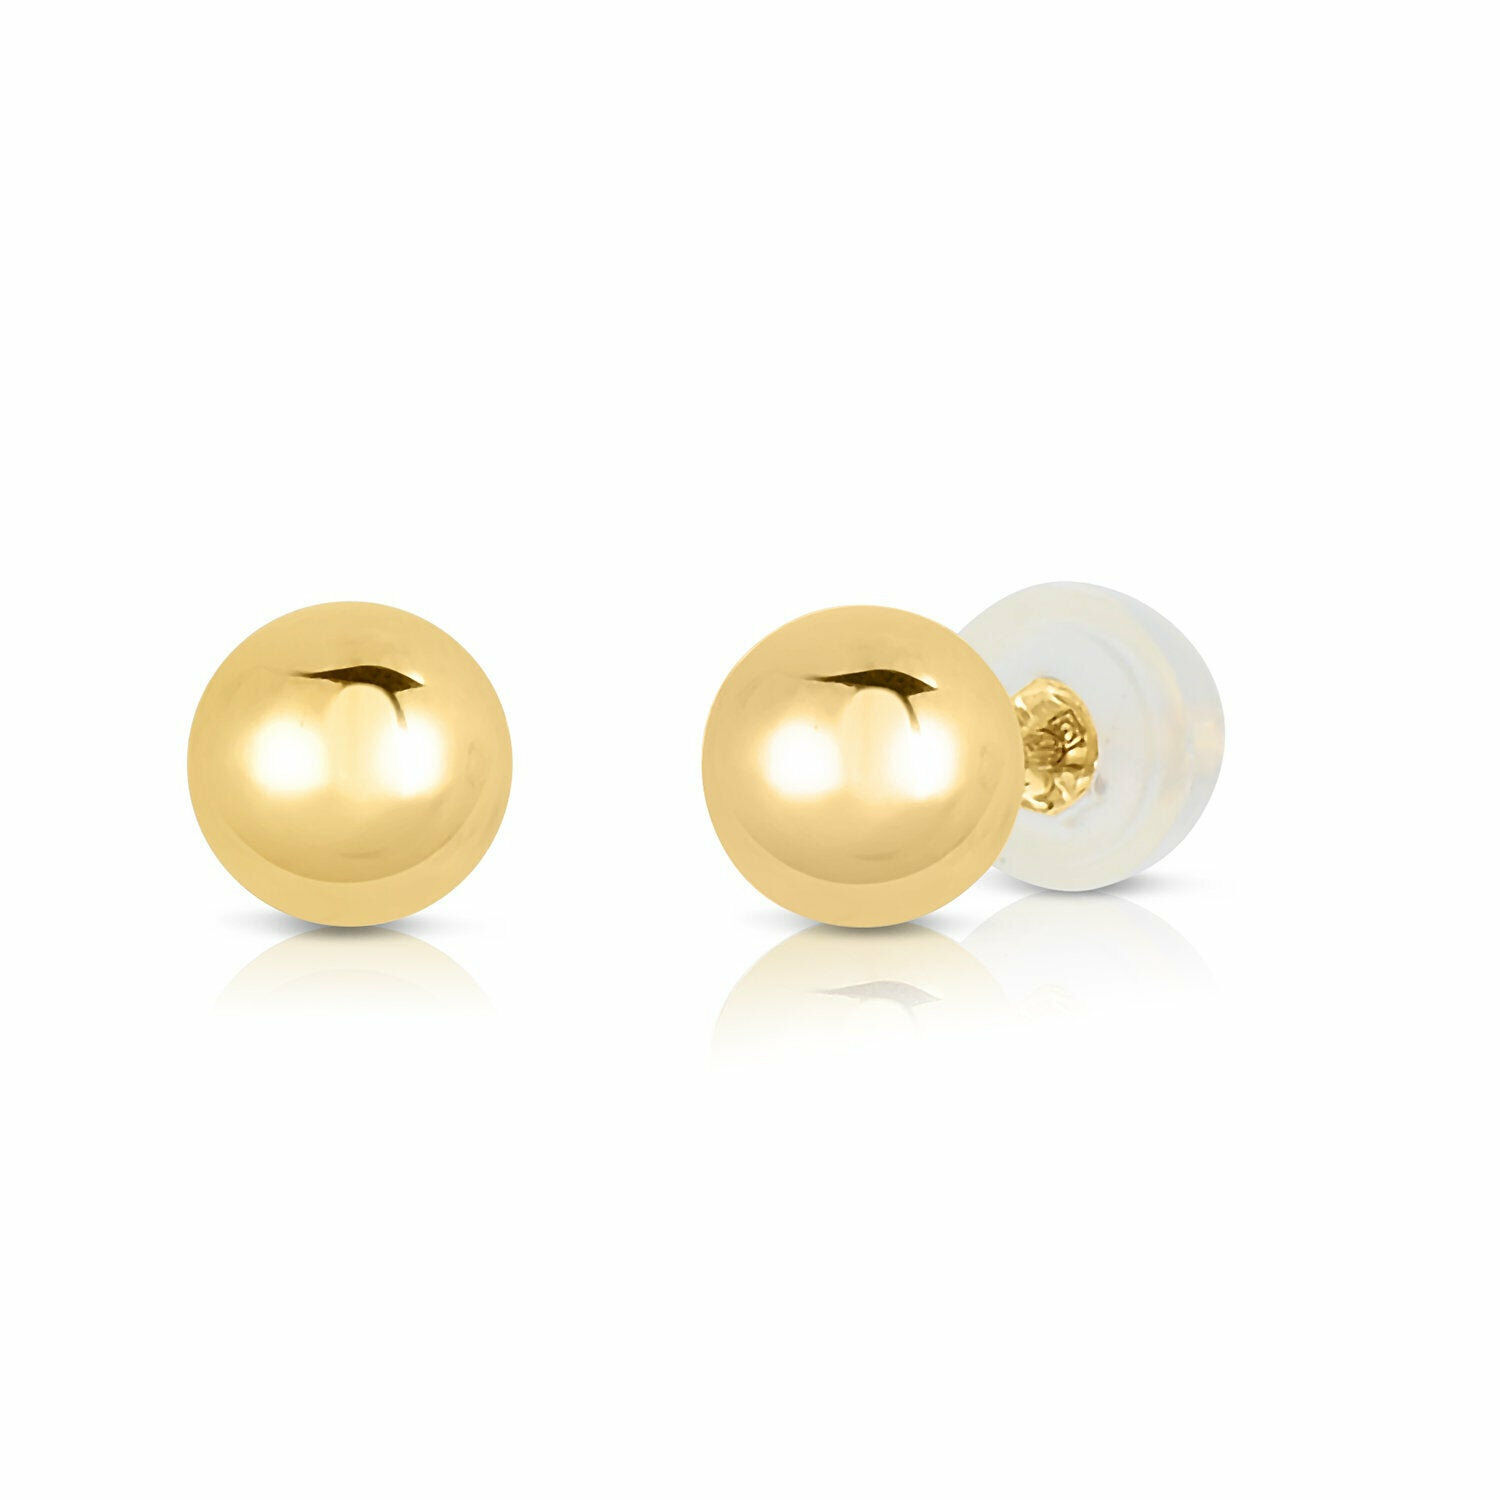 14K Real Solid Yellow Gold Polished Round Ball Stud Earrings Silicone Push-back